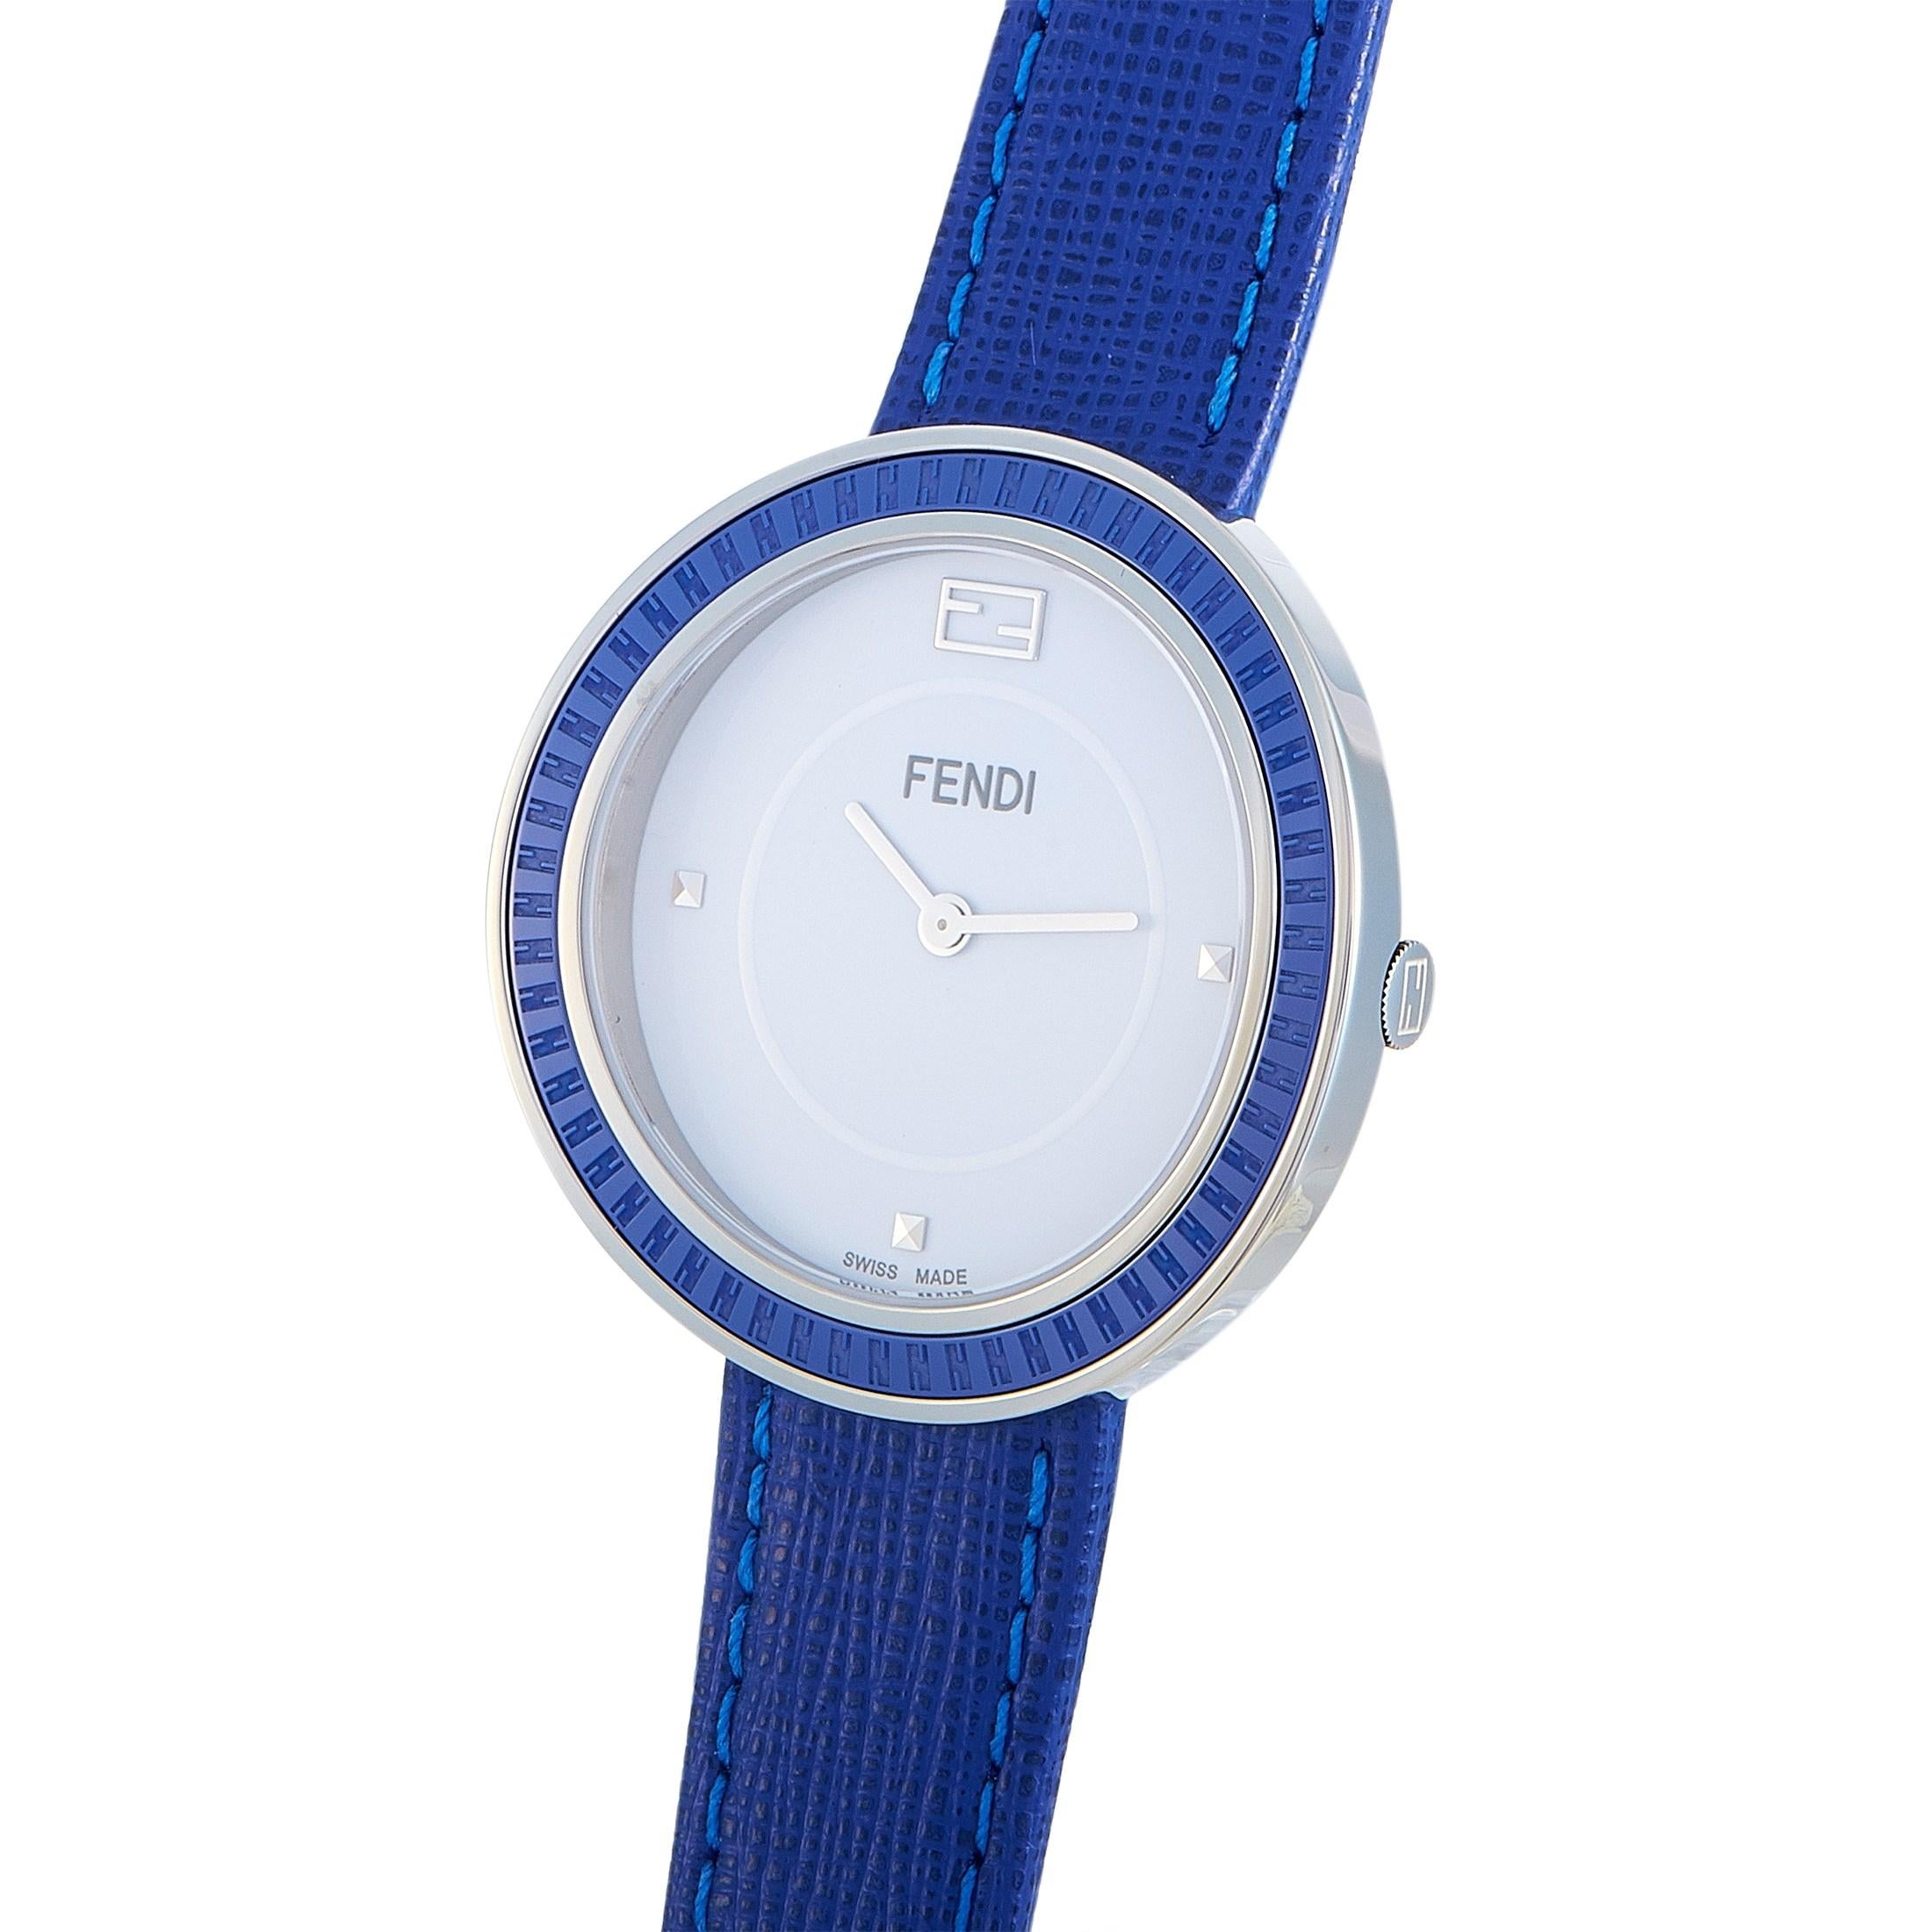 The Fendi My Way watch, reference number F356034031, boasts a 36 mm stainless steel case fitted with a blue ceramic bezel. The case is presented on a blue leather strap, secured on the wrist with a tang buckle. This model is powered by a quartz